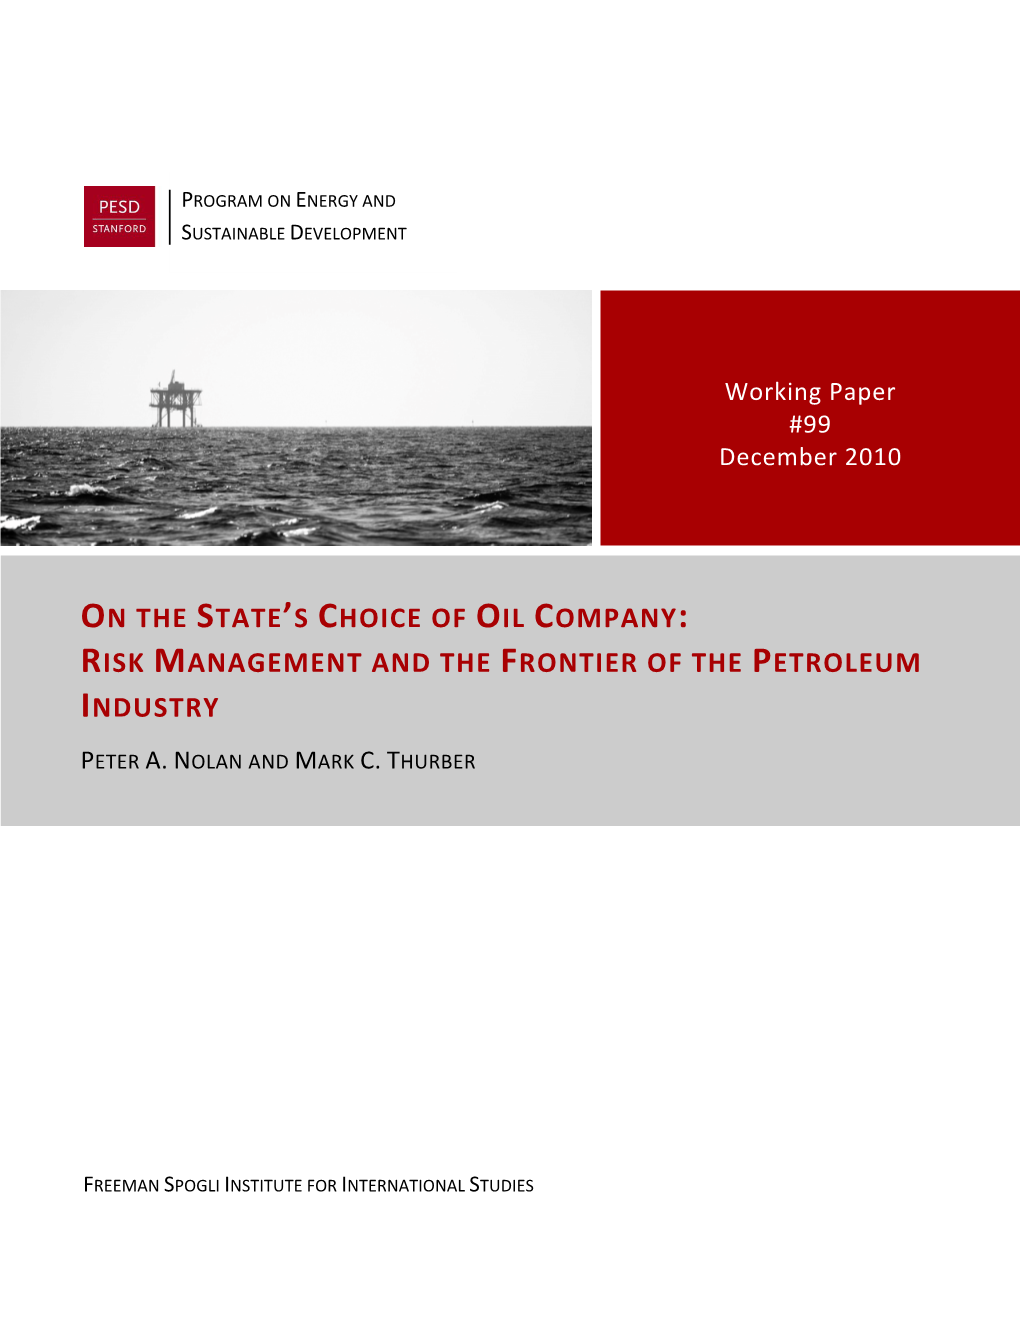 Risk Management and the Frontier of the Petroleum